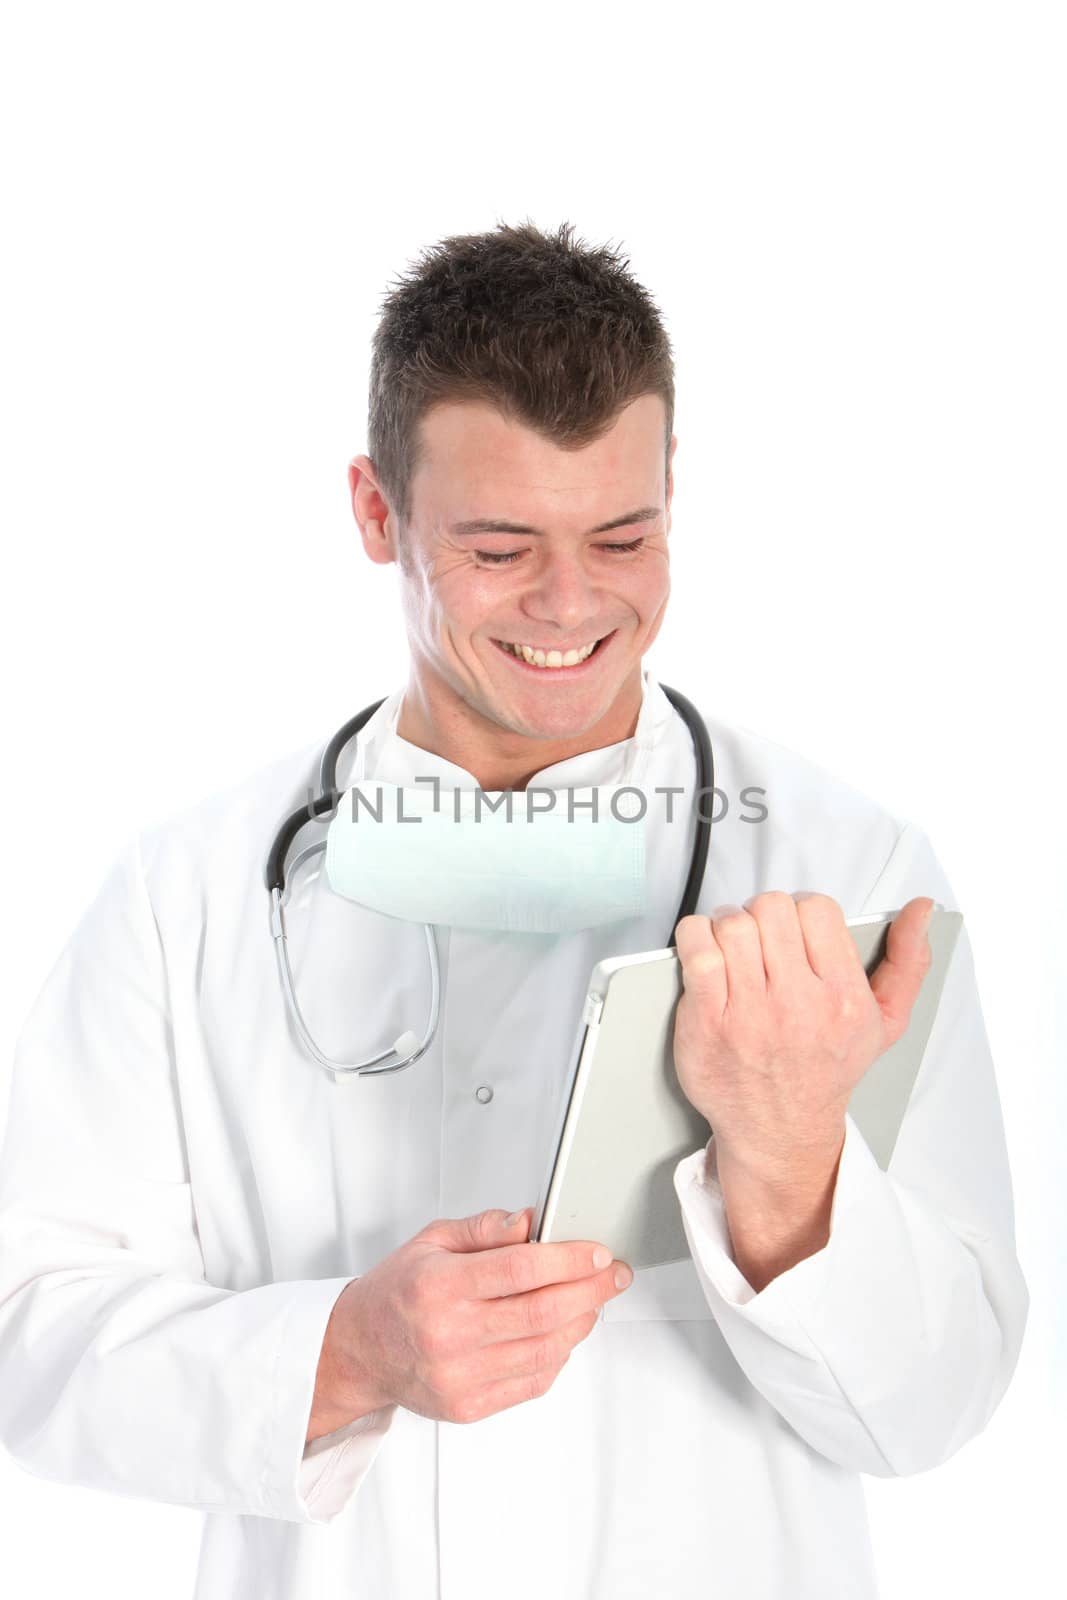 Handsome young male doctor wearing a labcoat and stethoscope smiling in glee at information on his tablet computer isolated on white